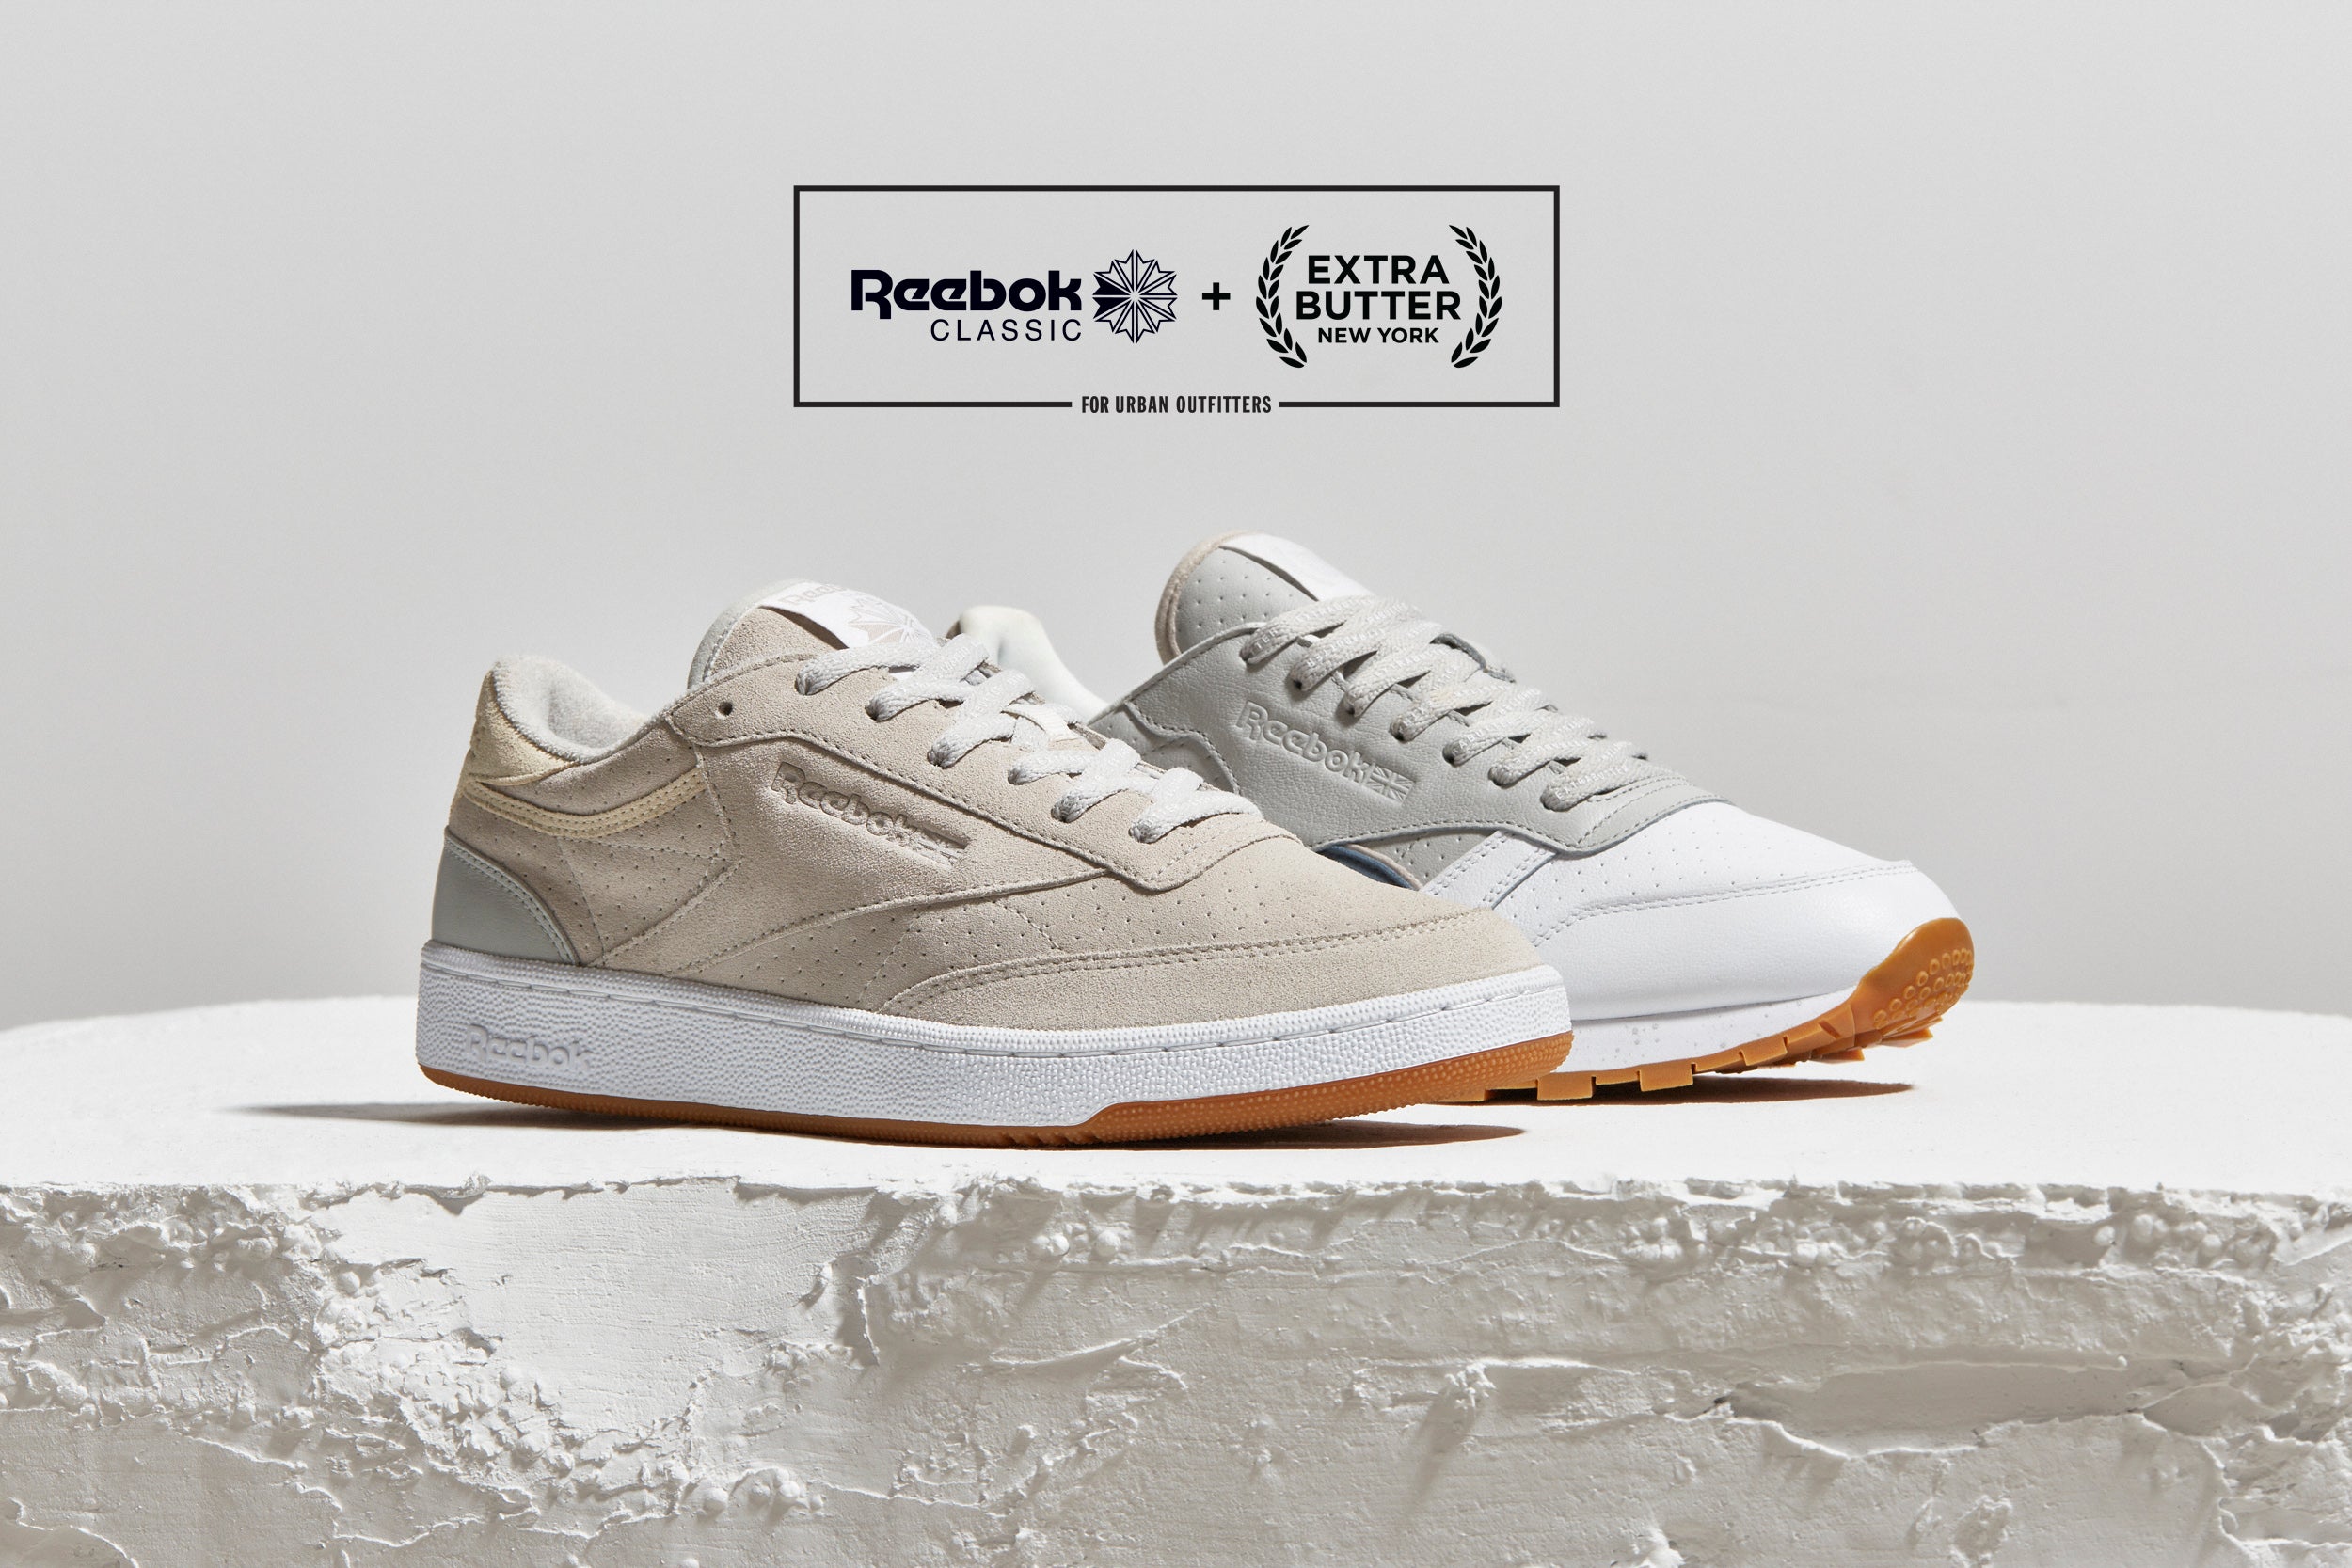 Extra Butter x Reebok Classics x Urban Outfitters article image